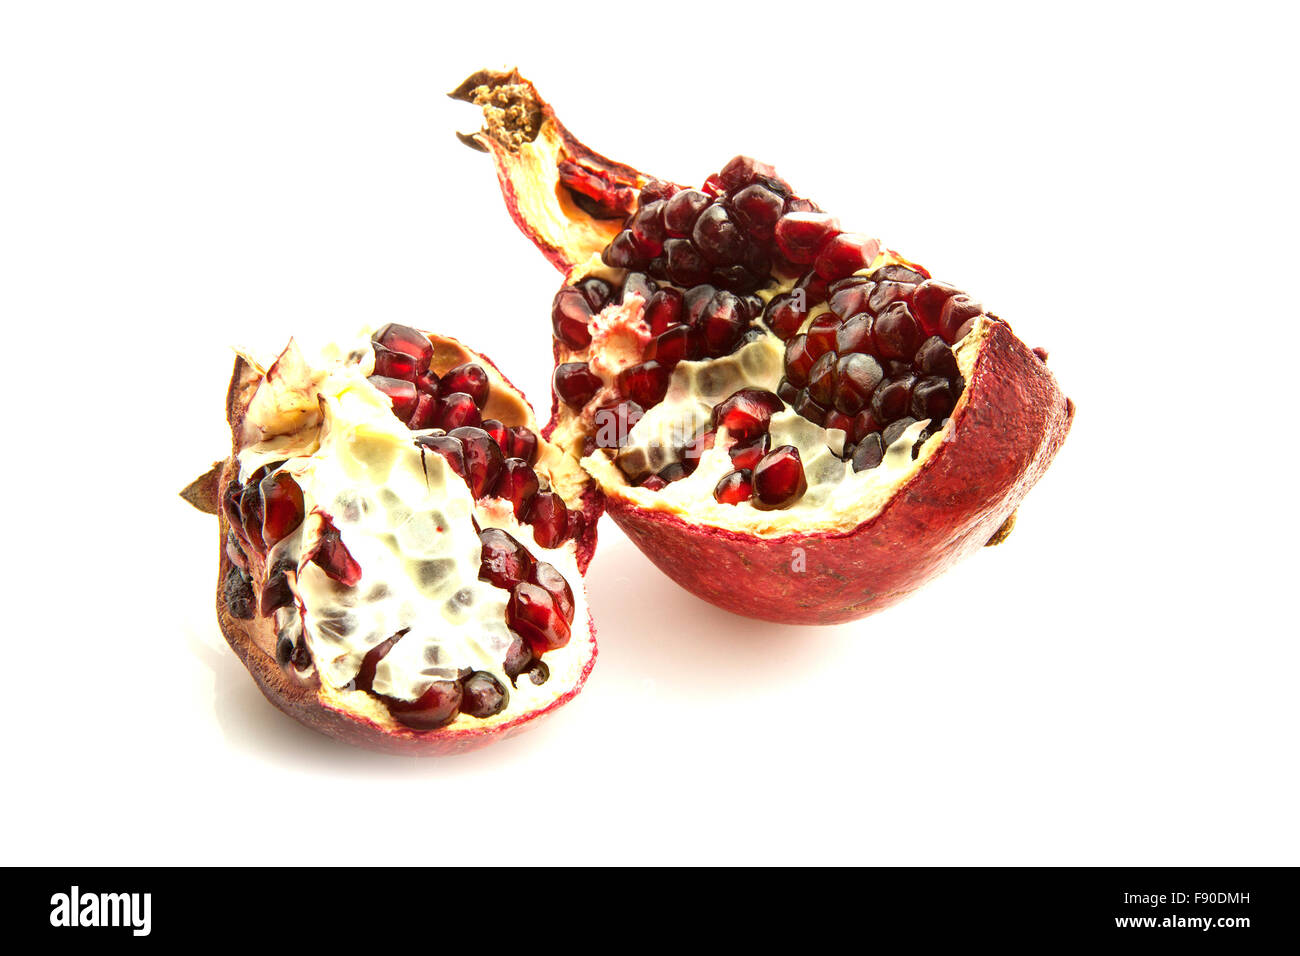 Pieces of pomegranate on a white background Stock Photo